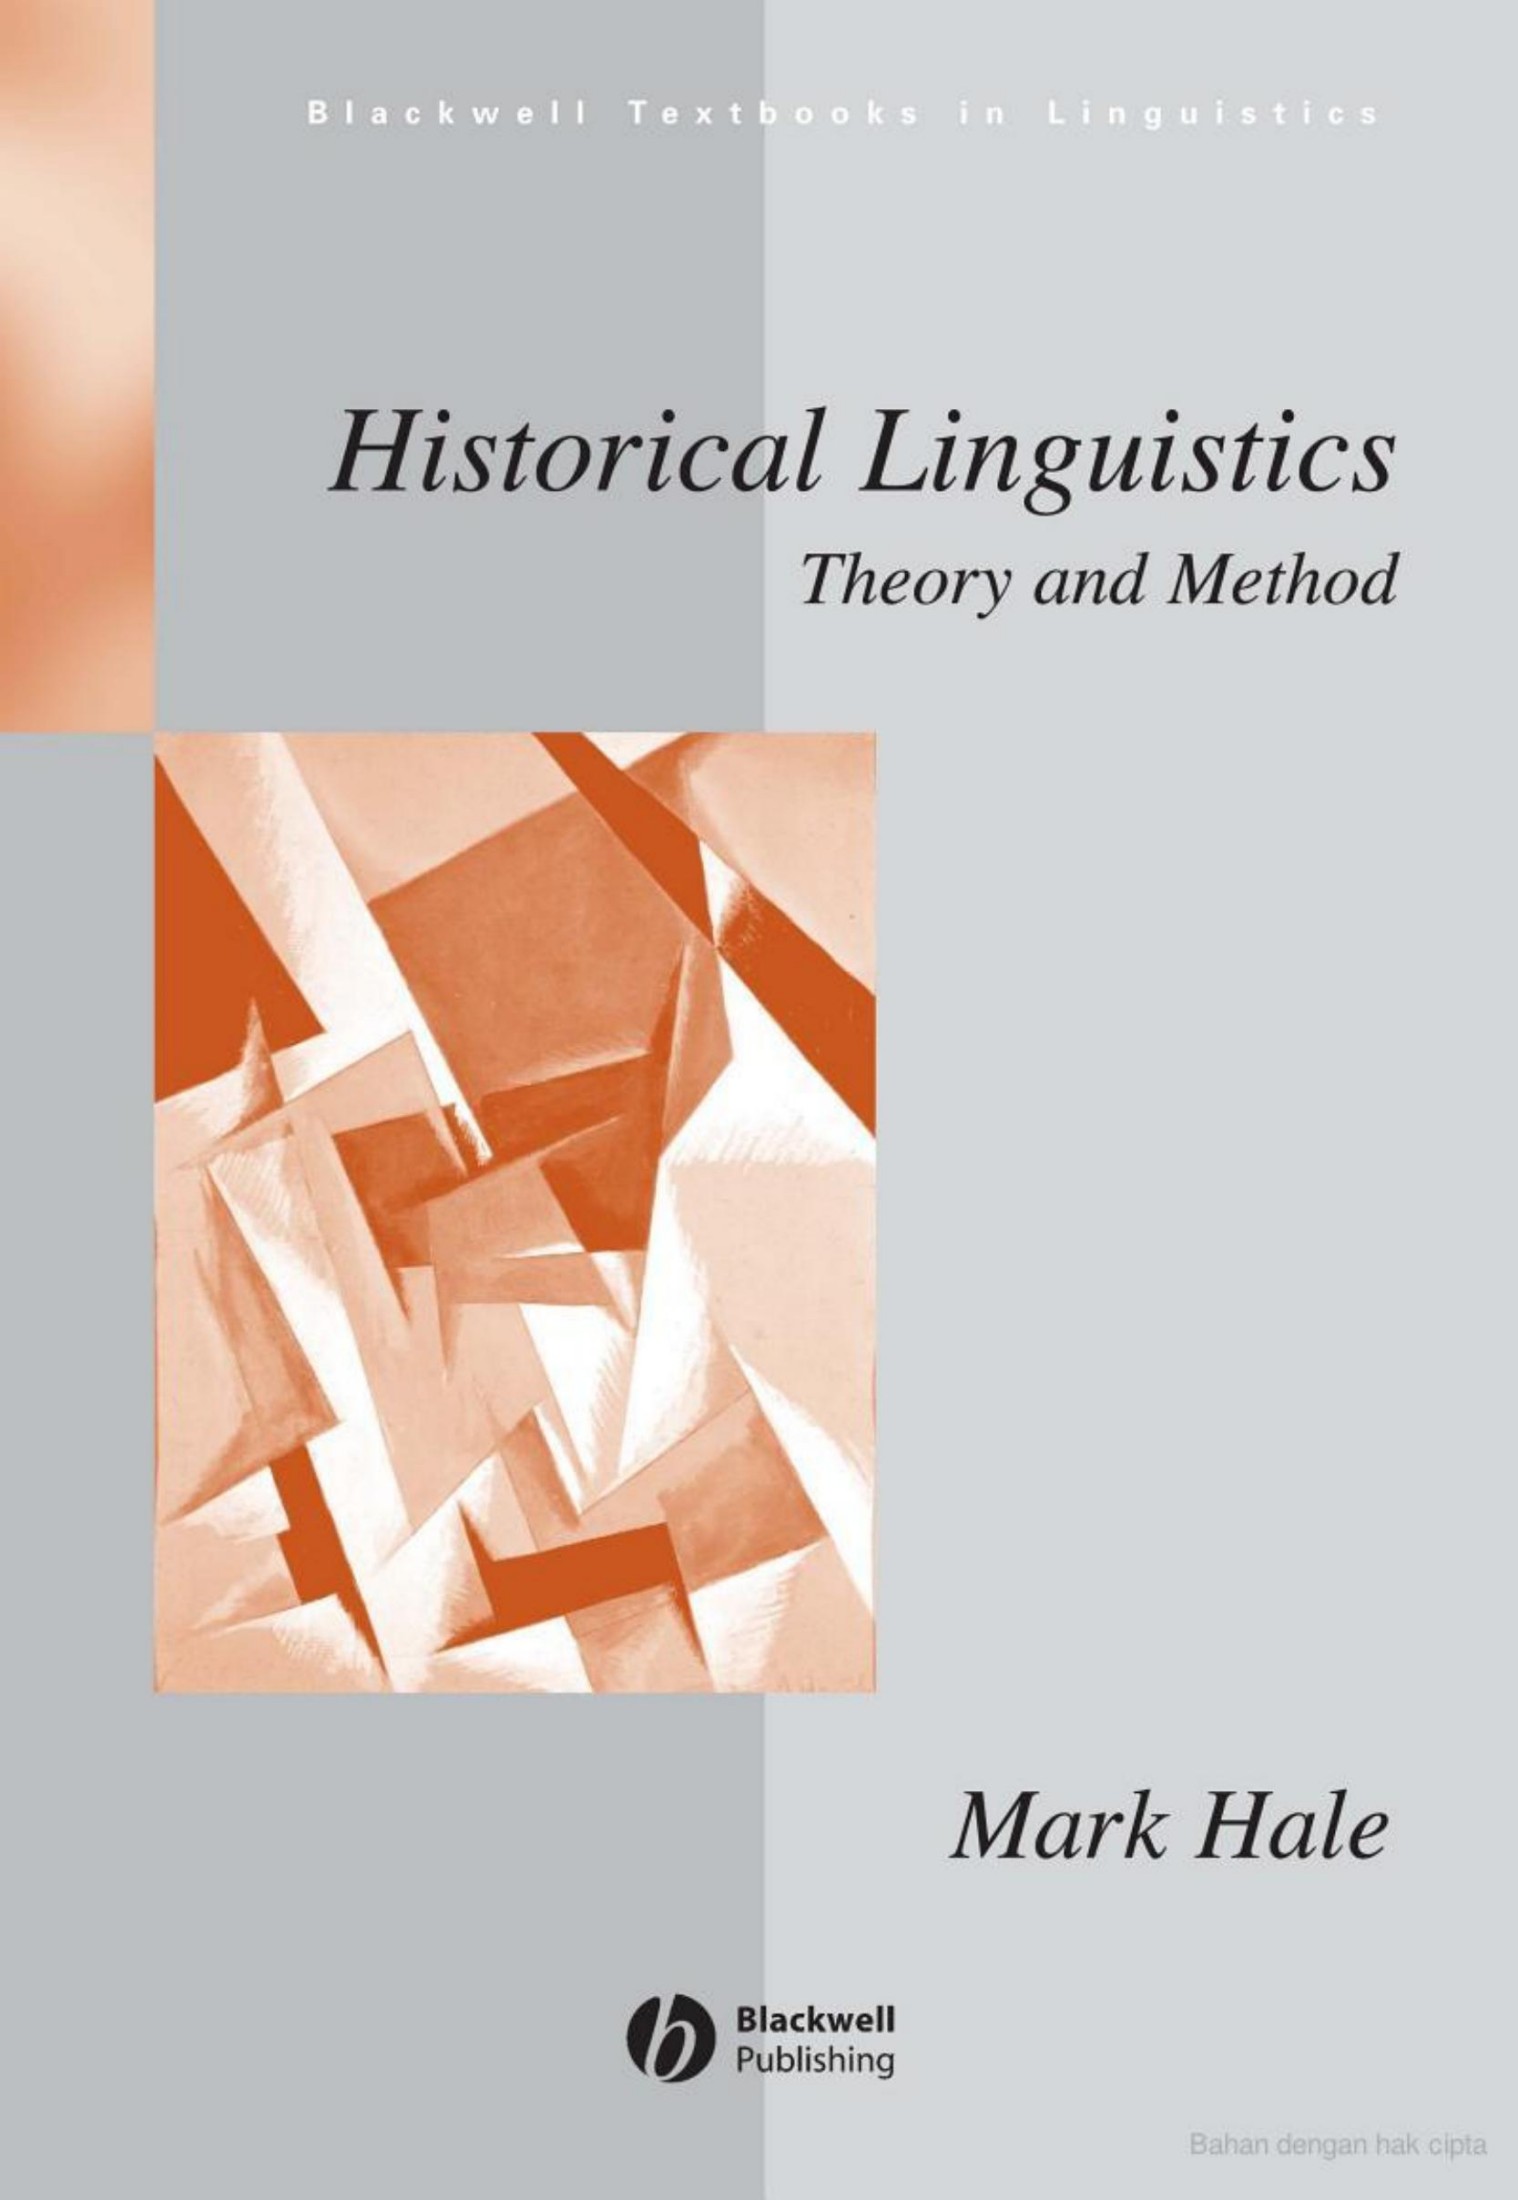 Historical Linguistics: Theory and Method